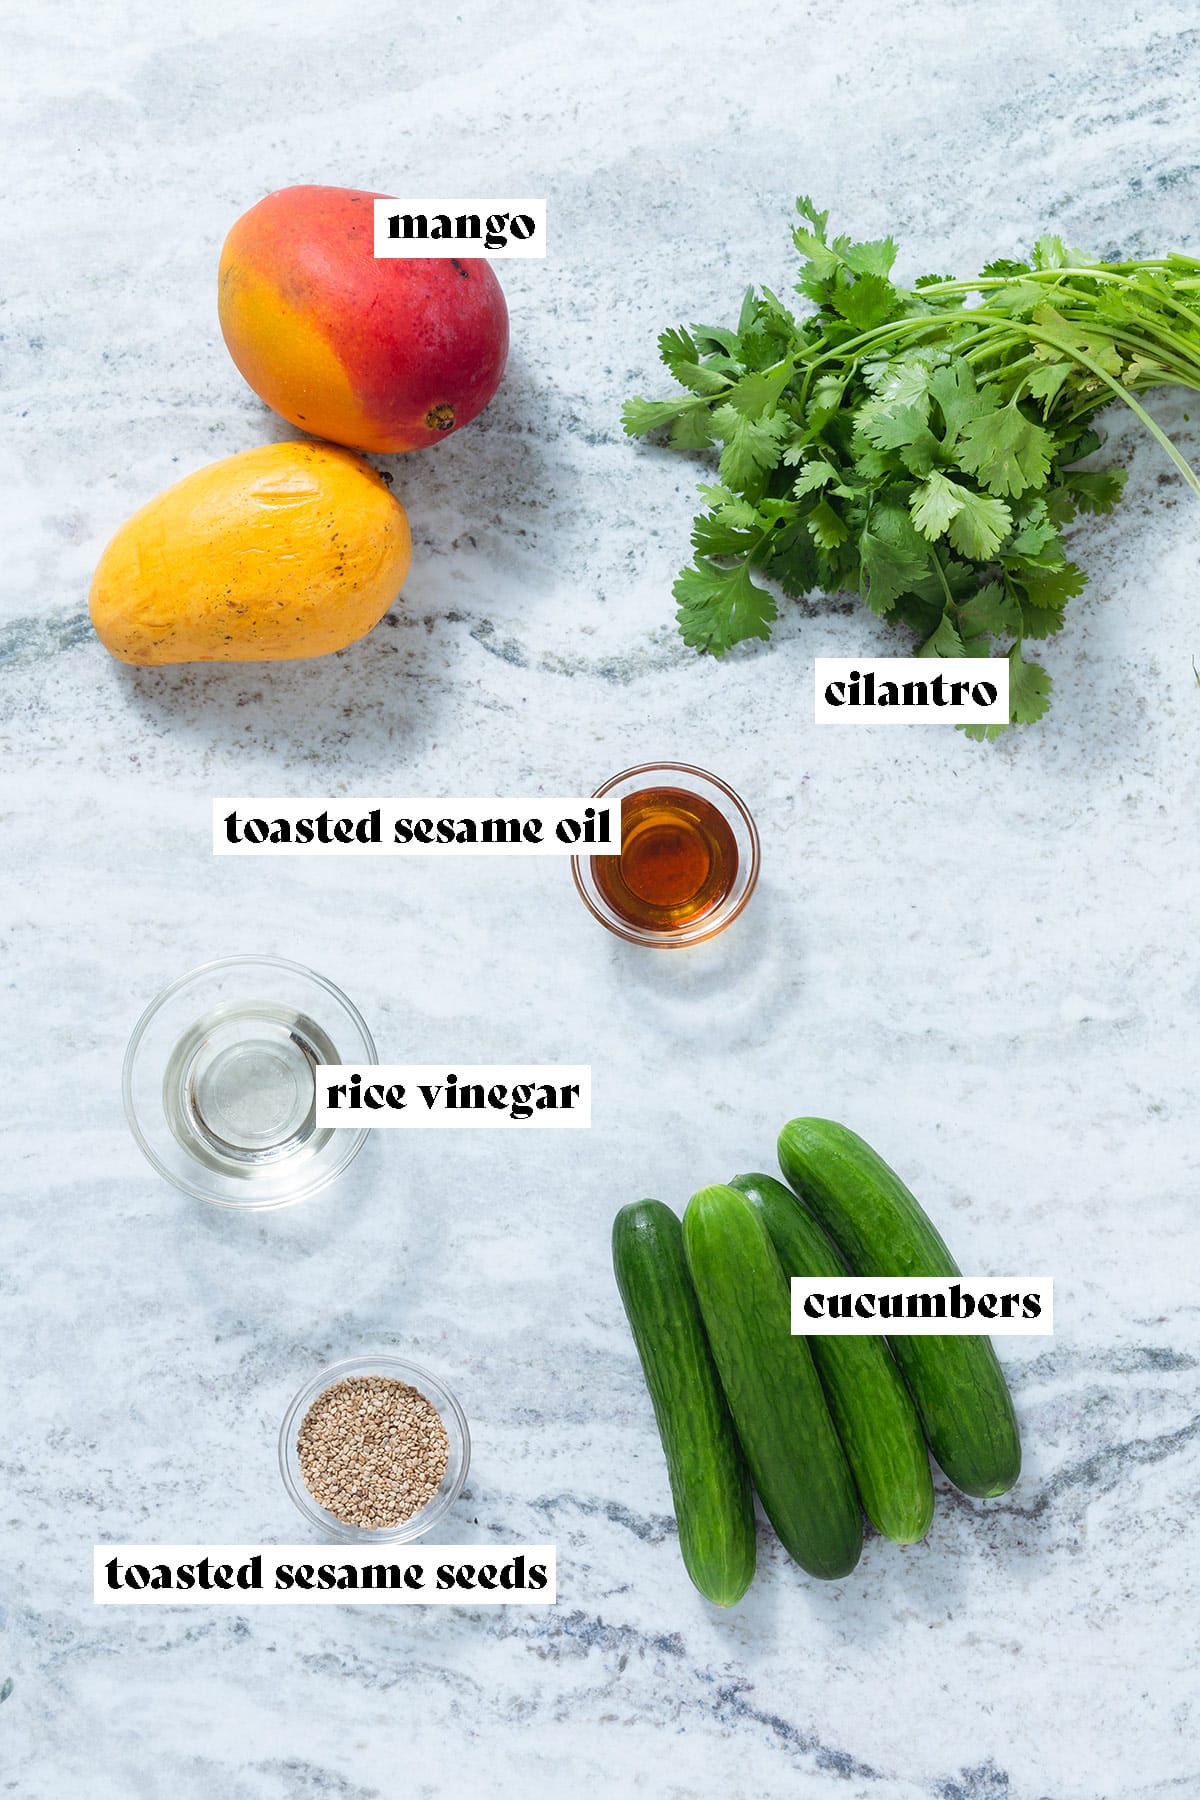 Mango, cucumbers, fresh cilantro, and other ingredients laid out on a grey stone background.